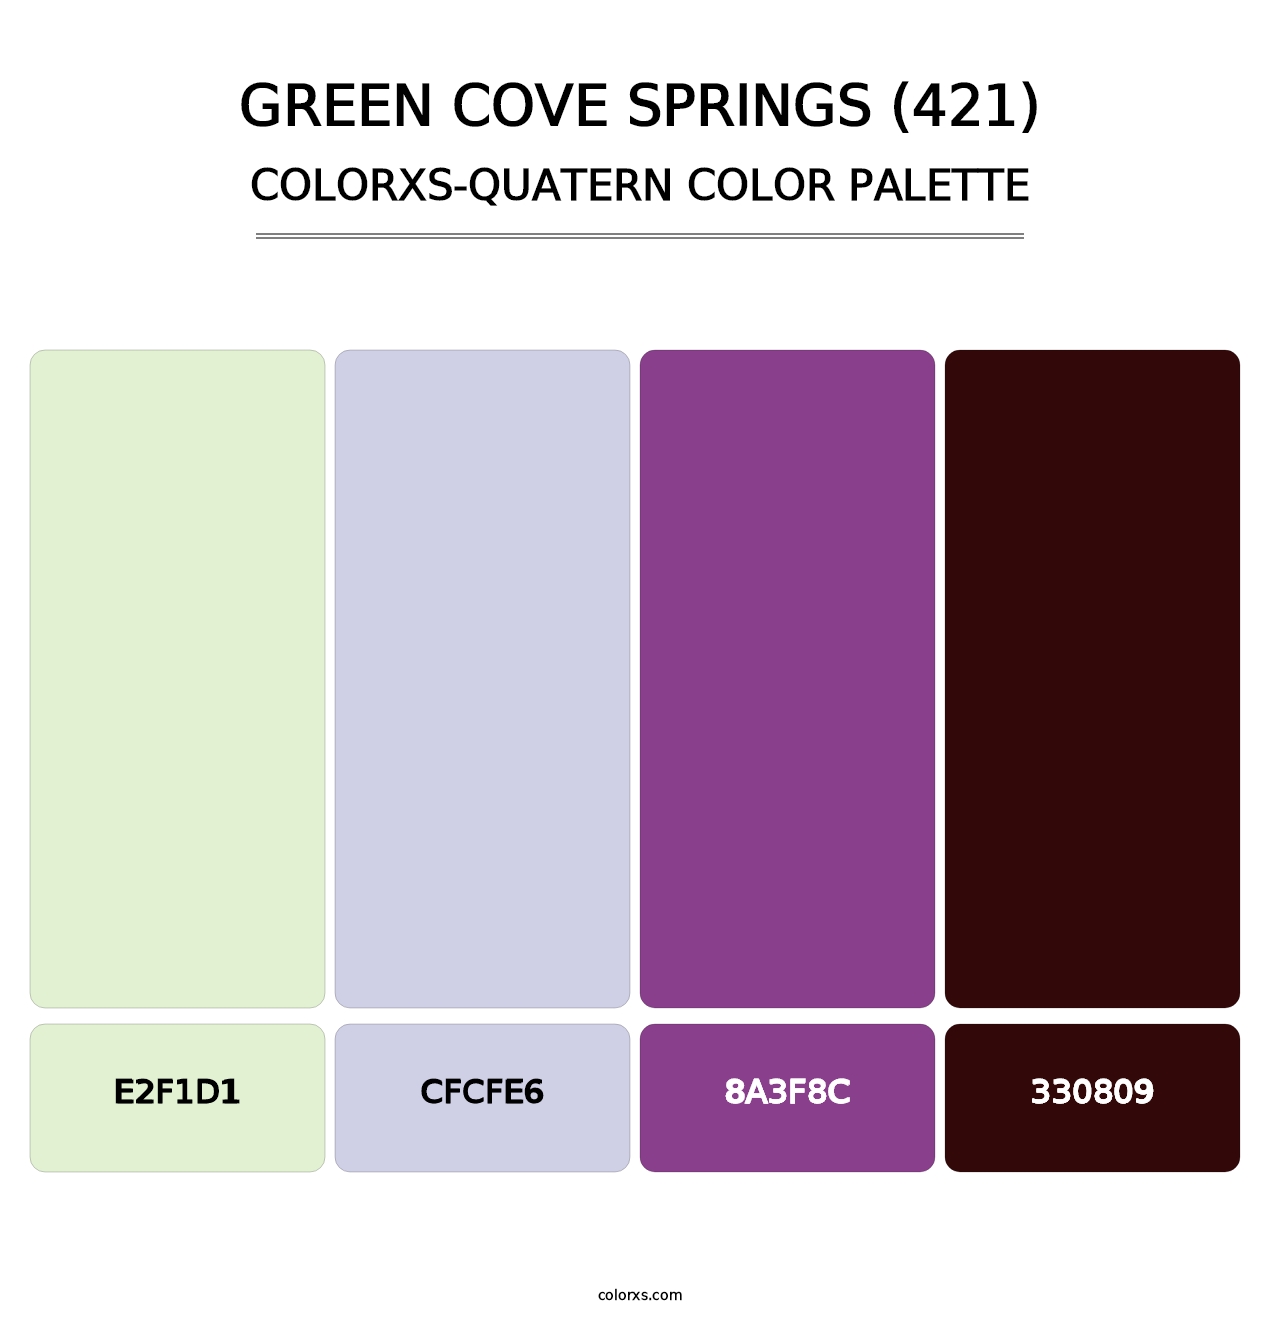 Green Cove Springs (421) - Colorxs Quatern Palette